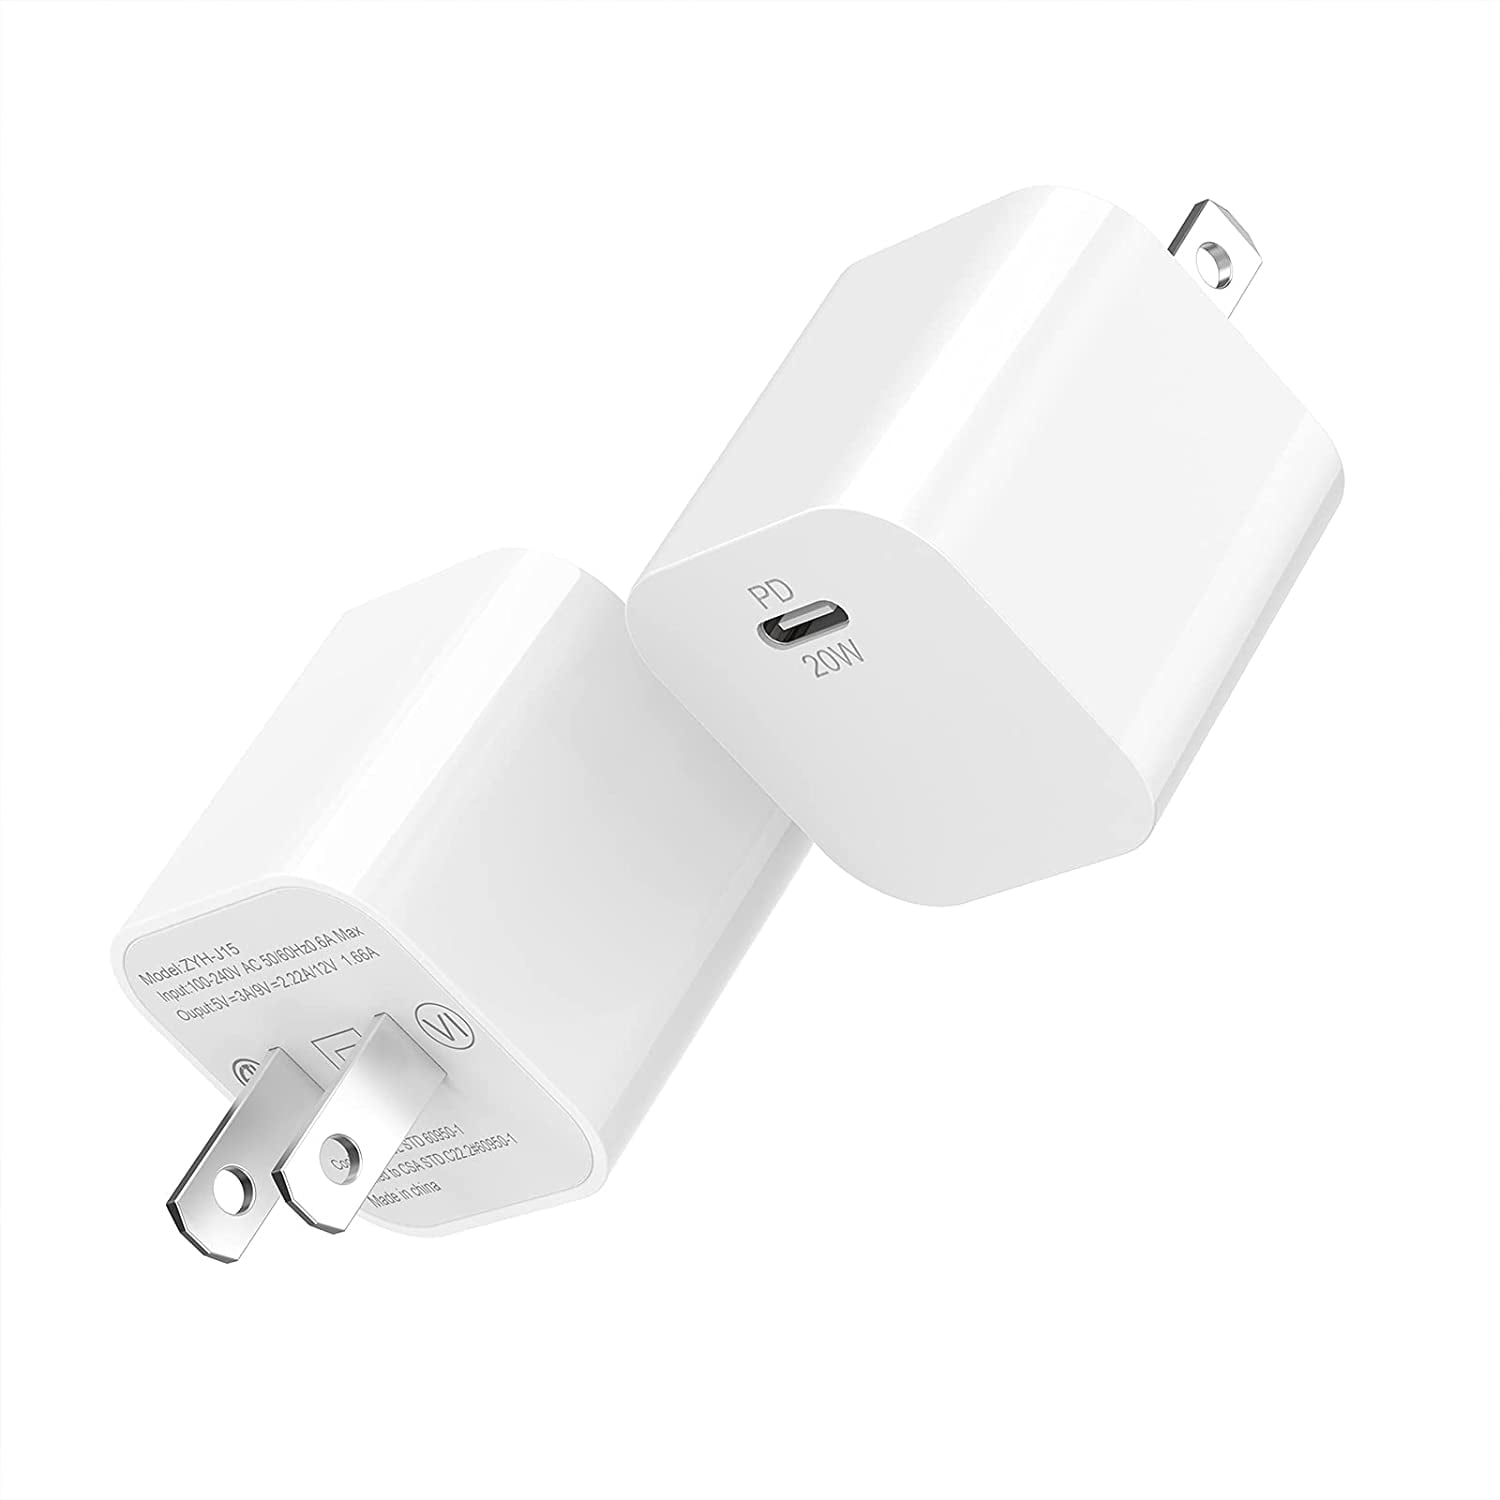  iPhone 13 12 Charger, 20W USB C Wall Charger, iPhone 12 Fast  Charger Adapter, PD 3.0 Type C Charger Compatible with iPhone 14/13 /12/11/X  Series, Pixel 3/Galaxy S20/S10 : Cell Phones & Accessories